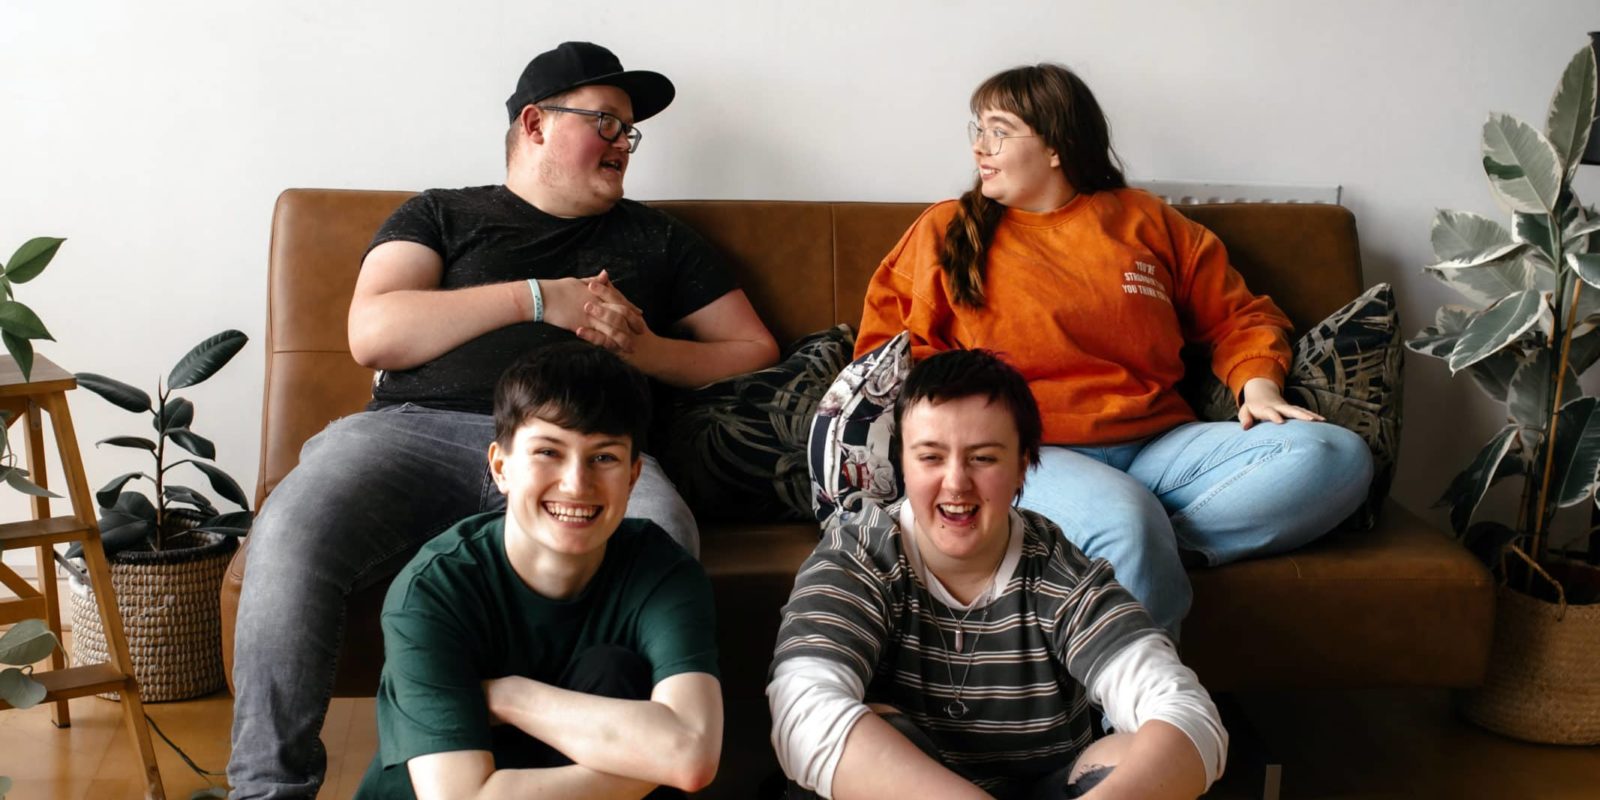 Group of young people laughing together, two sat on floor, two sat on sofa